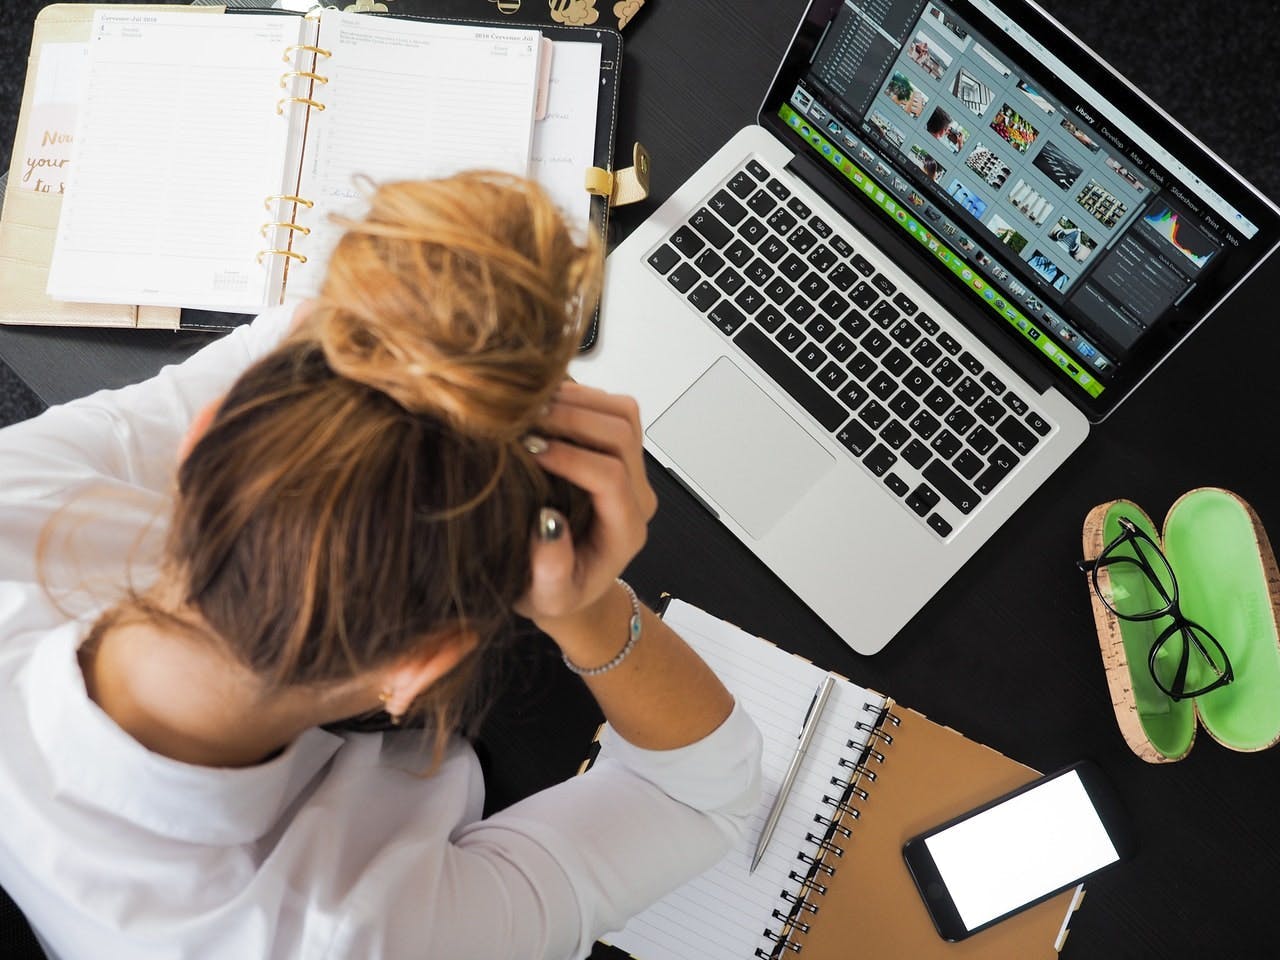 woman who looks stressed while in front of a laptop